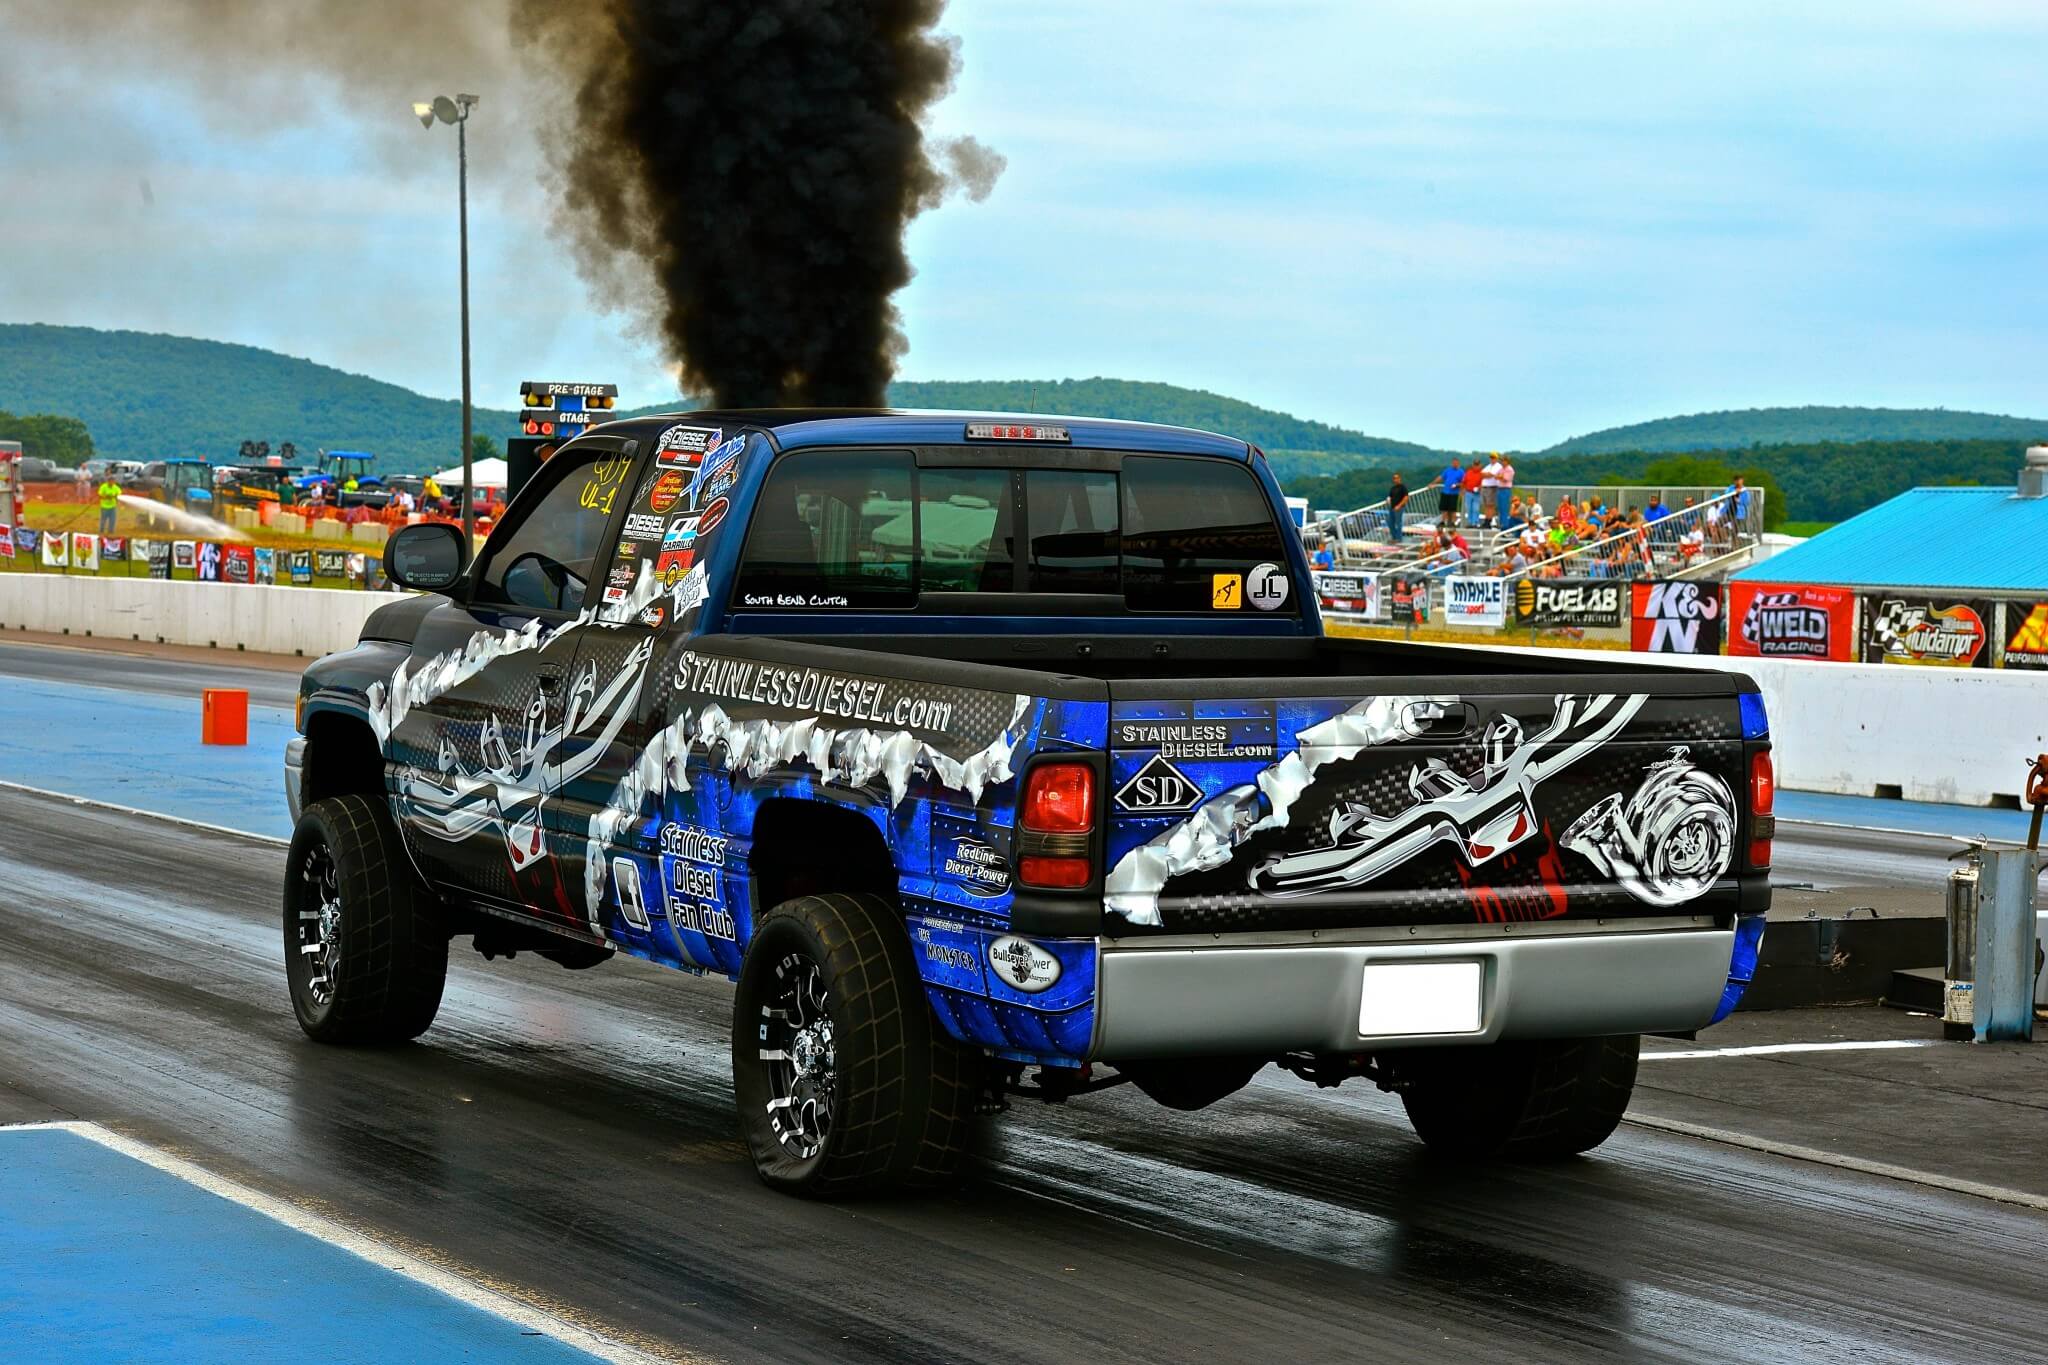 Johnny Gilbert with his StainlessDiesel.com truck took first in the Unlimited Heads Up drag race.